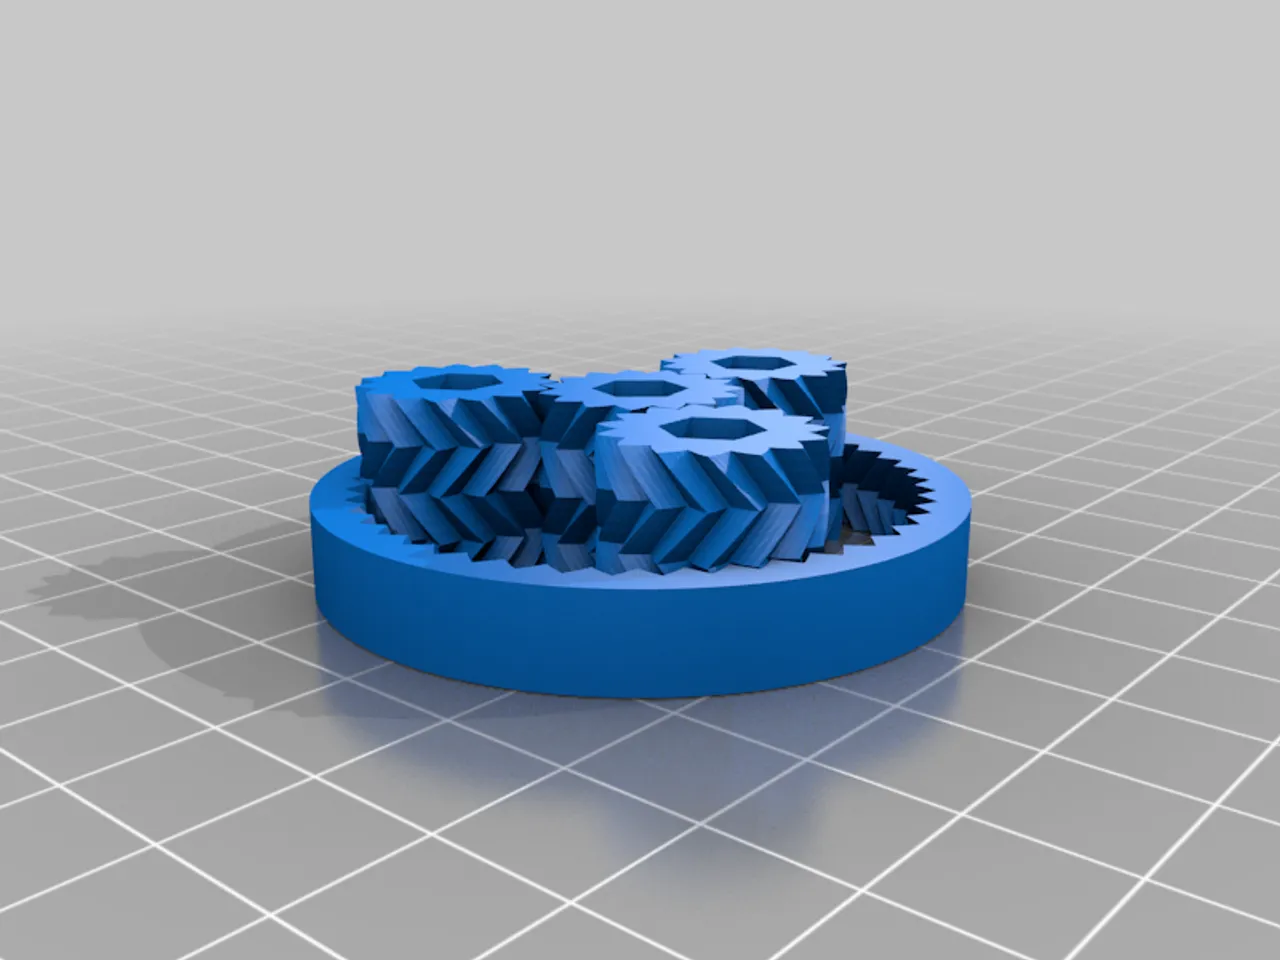 Rings definition of the mechanical epicyclic gear